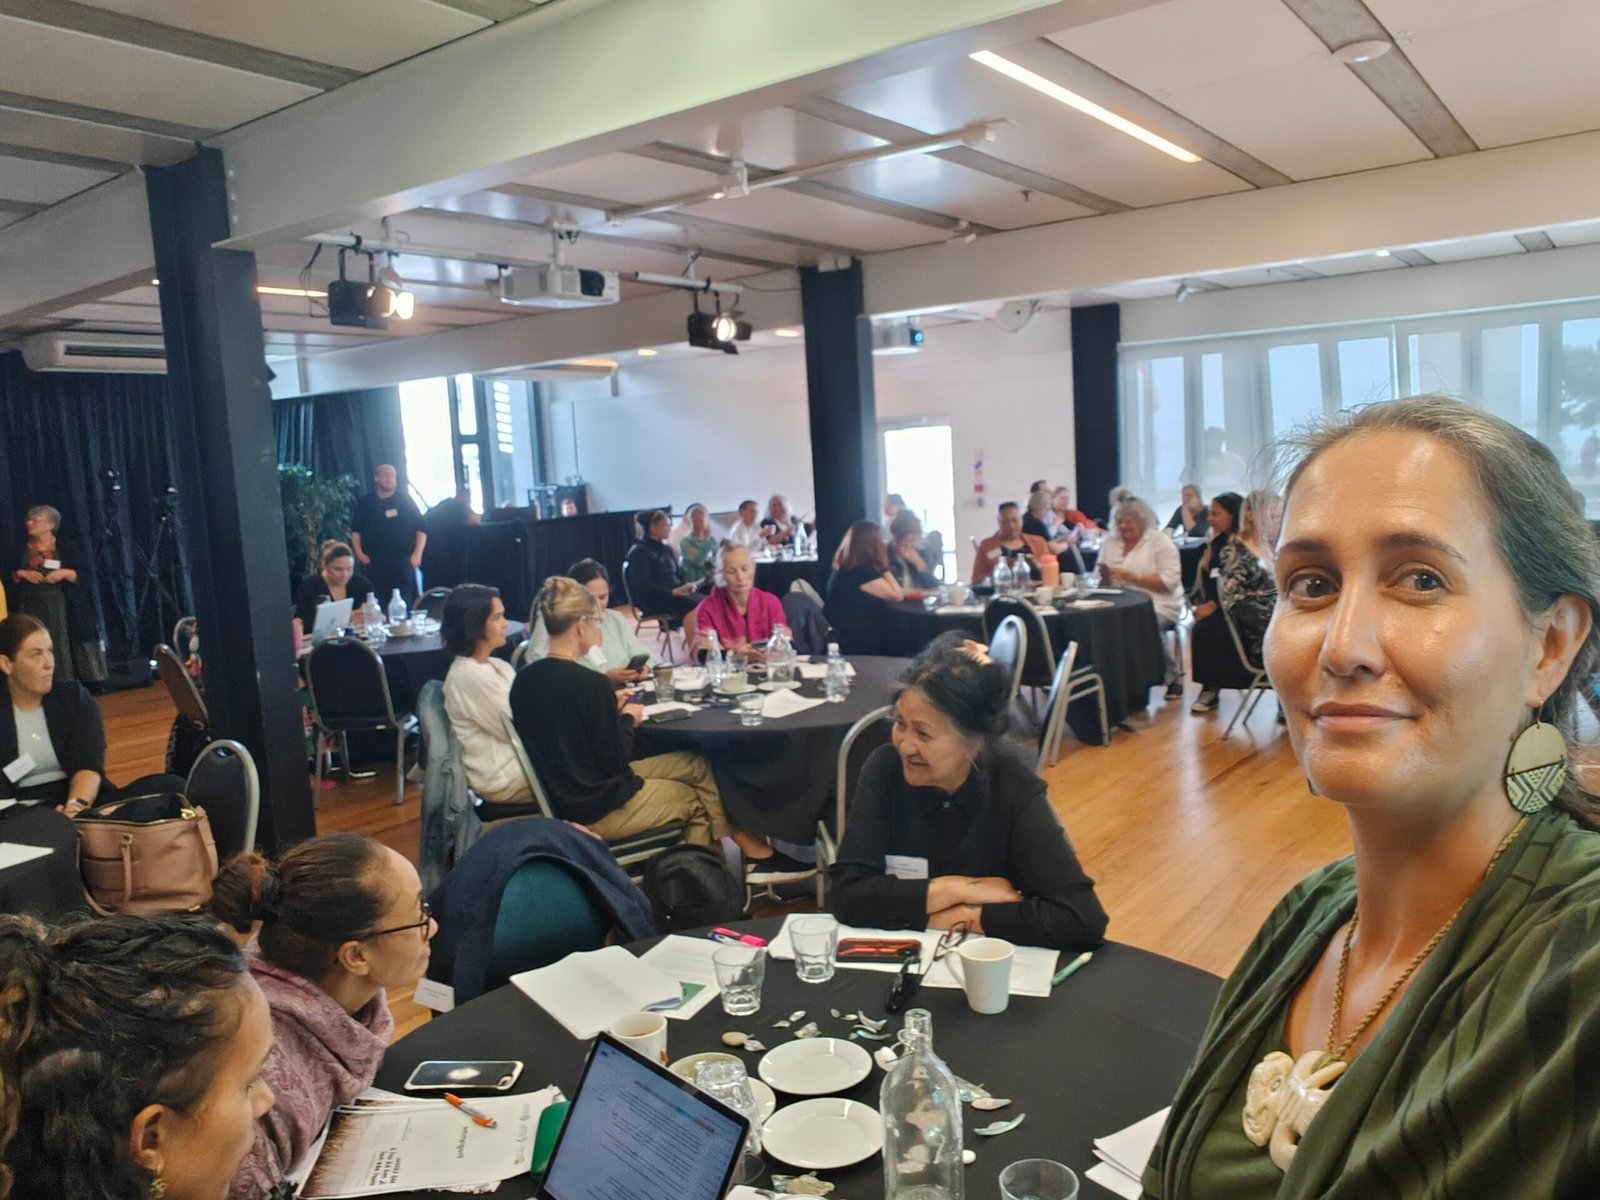 Maori woman taking a selfie of her and the the conference room behind her with people sitting at round tables